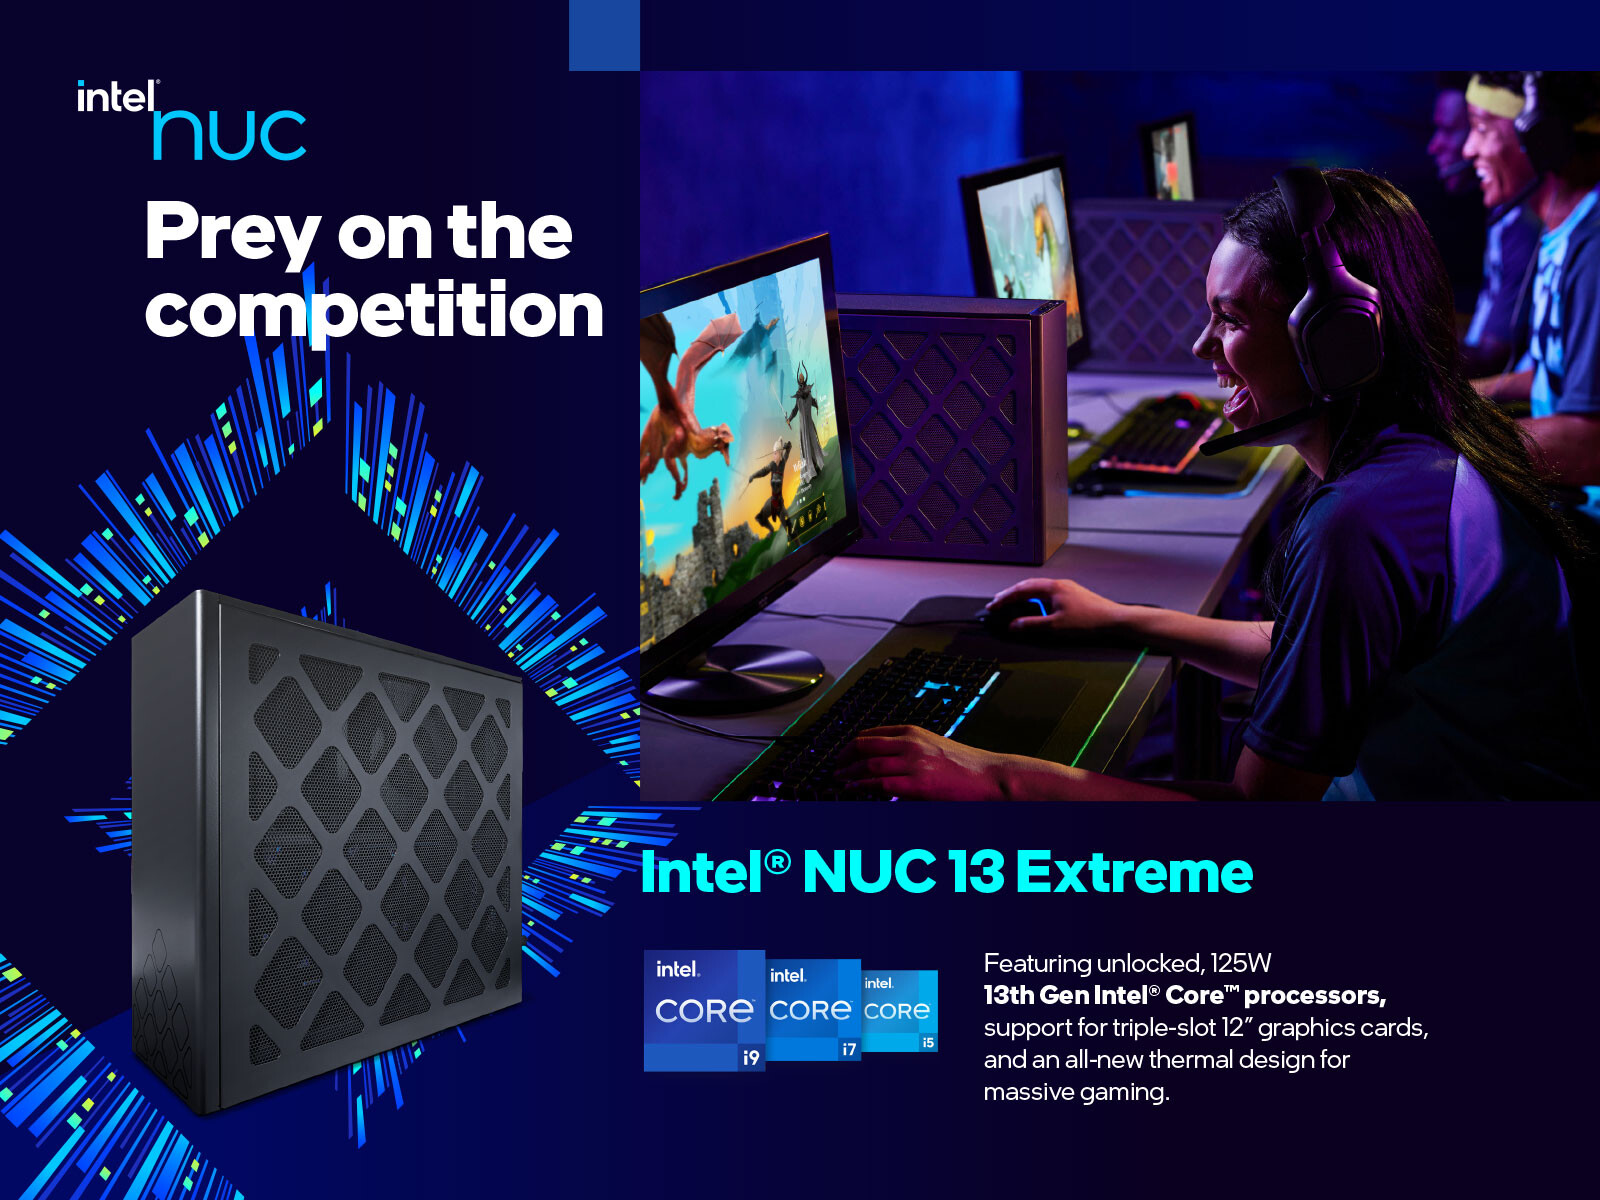 Intel NUC 13 Extreme Sets New Standard for Mini PC Gaming Performance